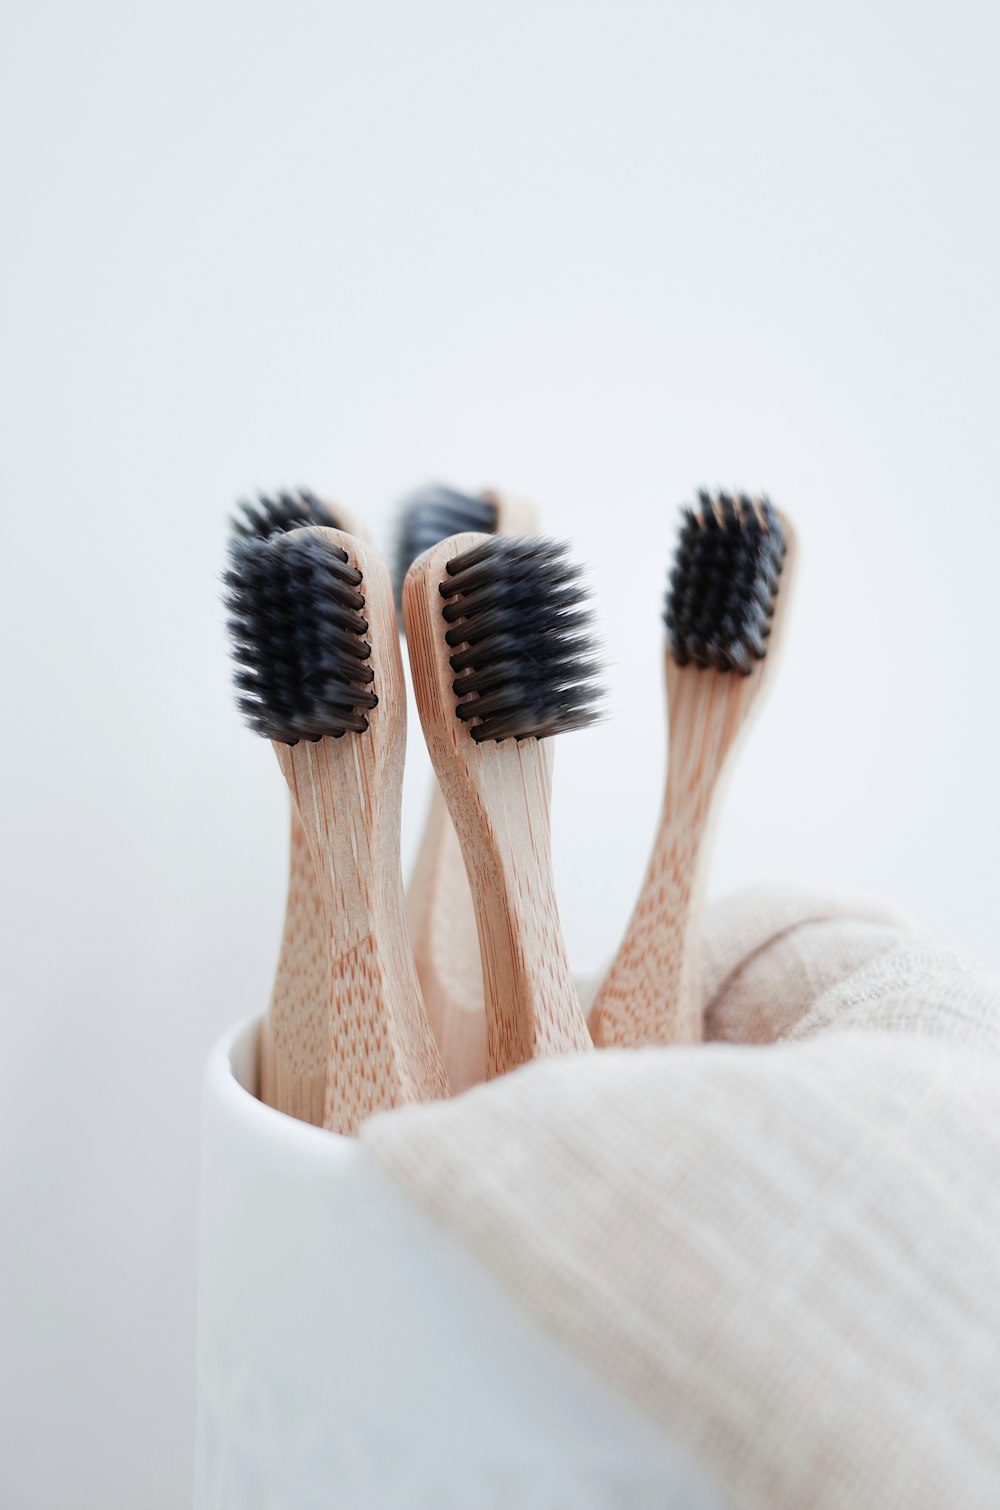 three wooden toothbrushes in a white cup